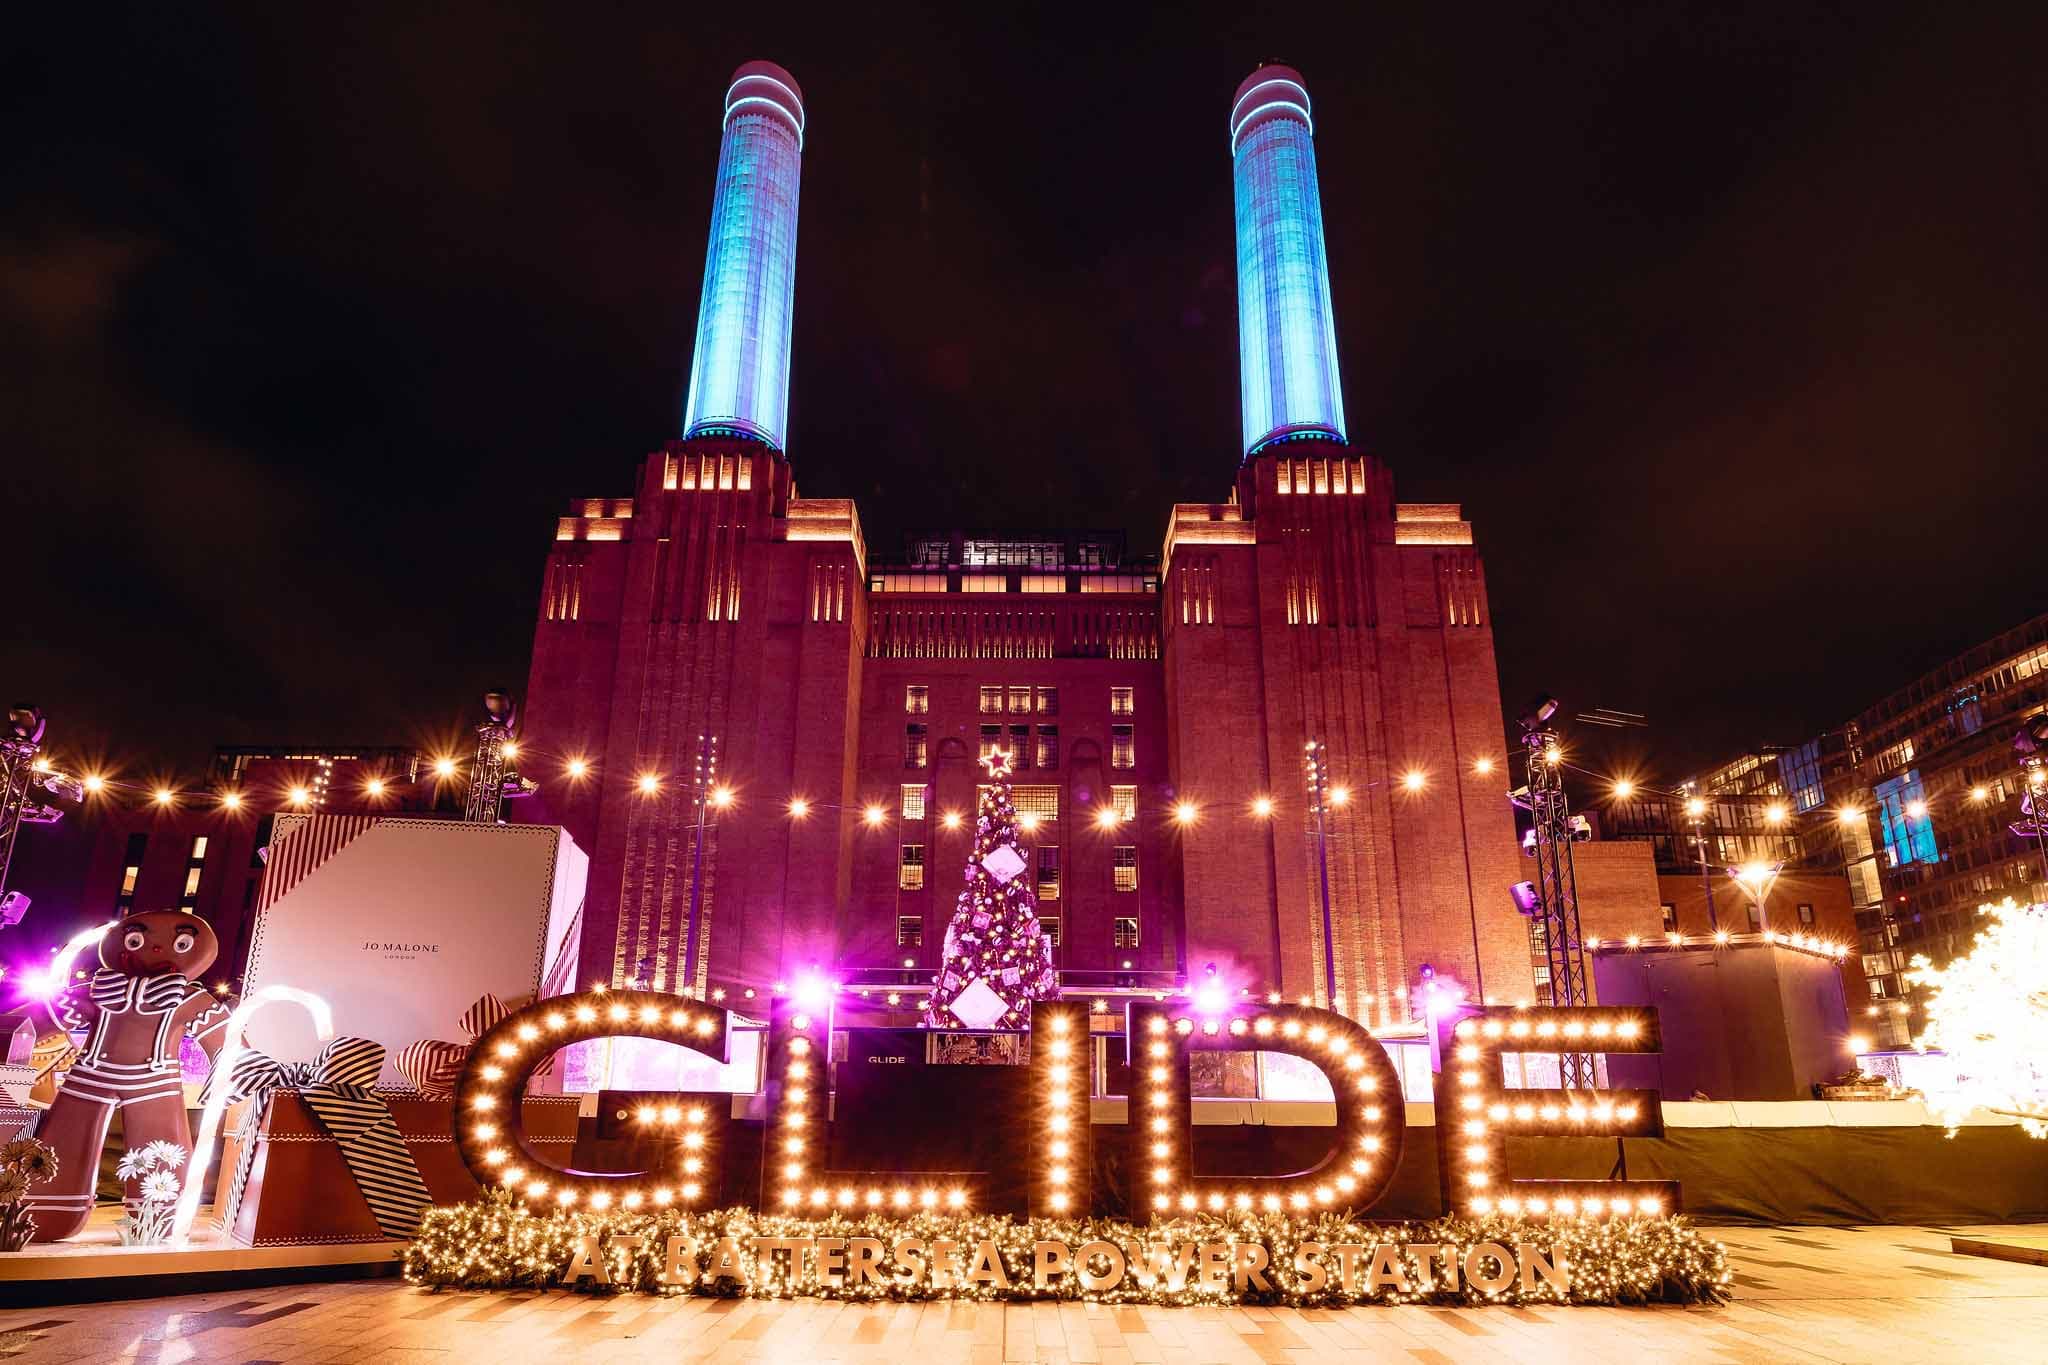 Glide at Battersea Power Station at night